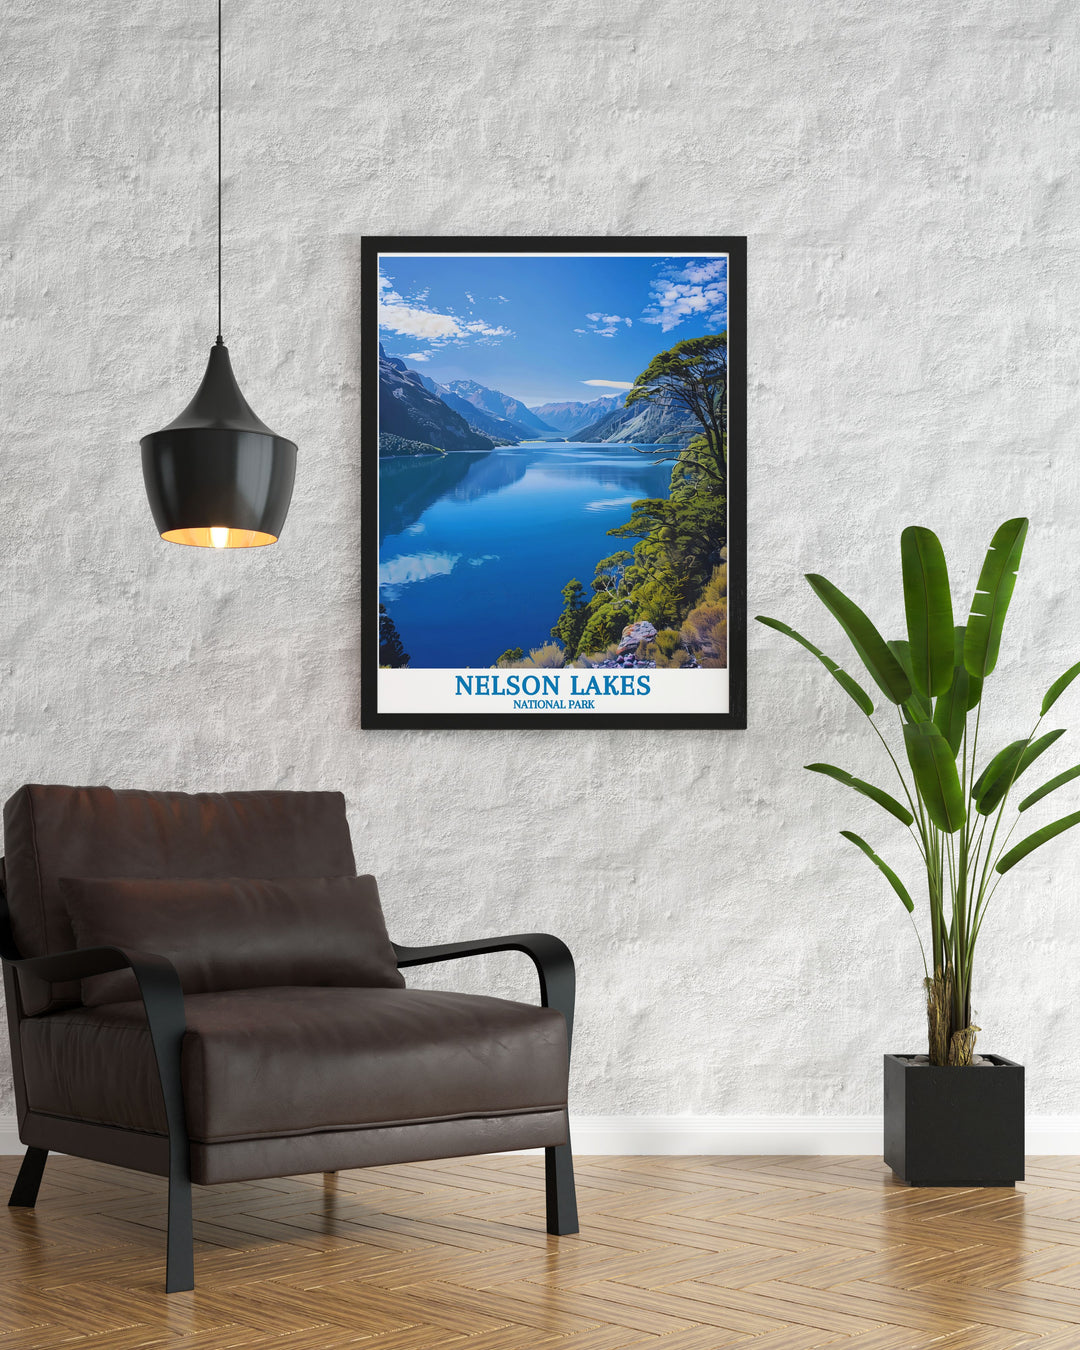 Captivating National Park art from Nelson Lakes National Park in New Zealands South Island, perfect for transforming living spaces with vibrant hues and intricate details that celebrate the regions natural wonders and landscapes.